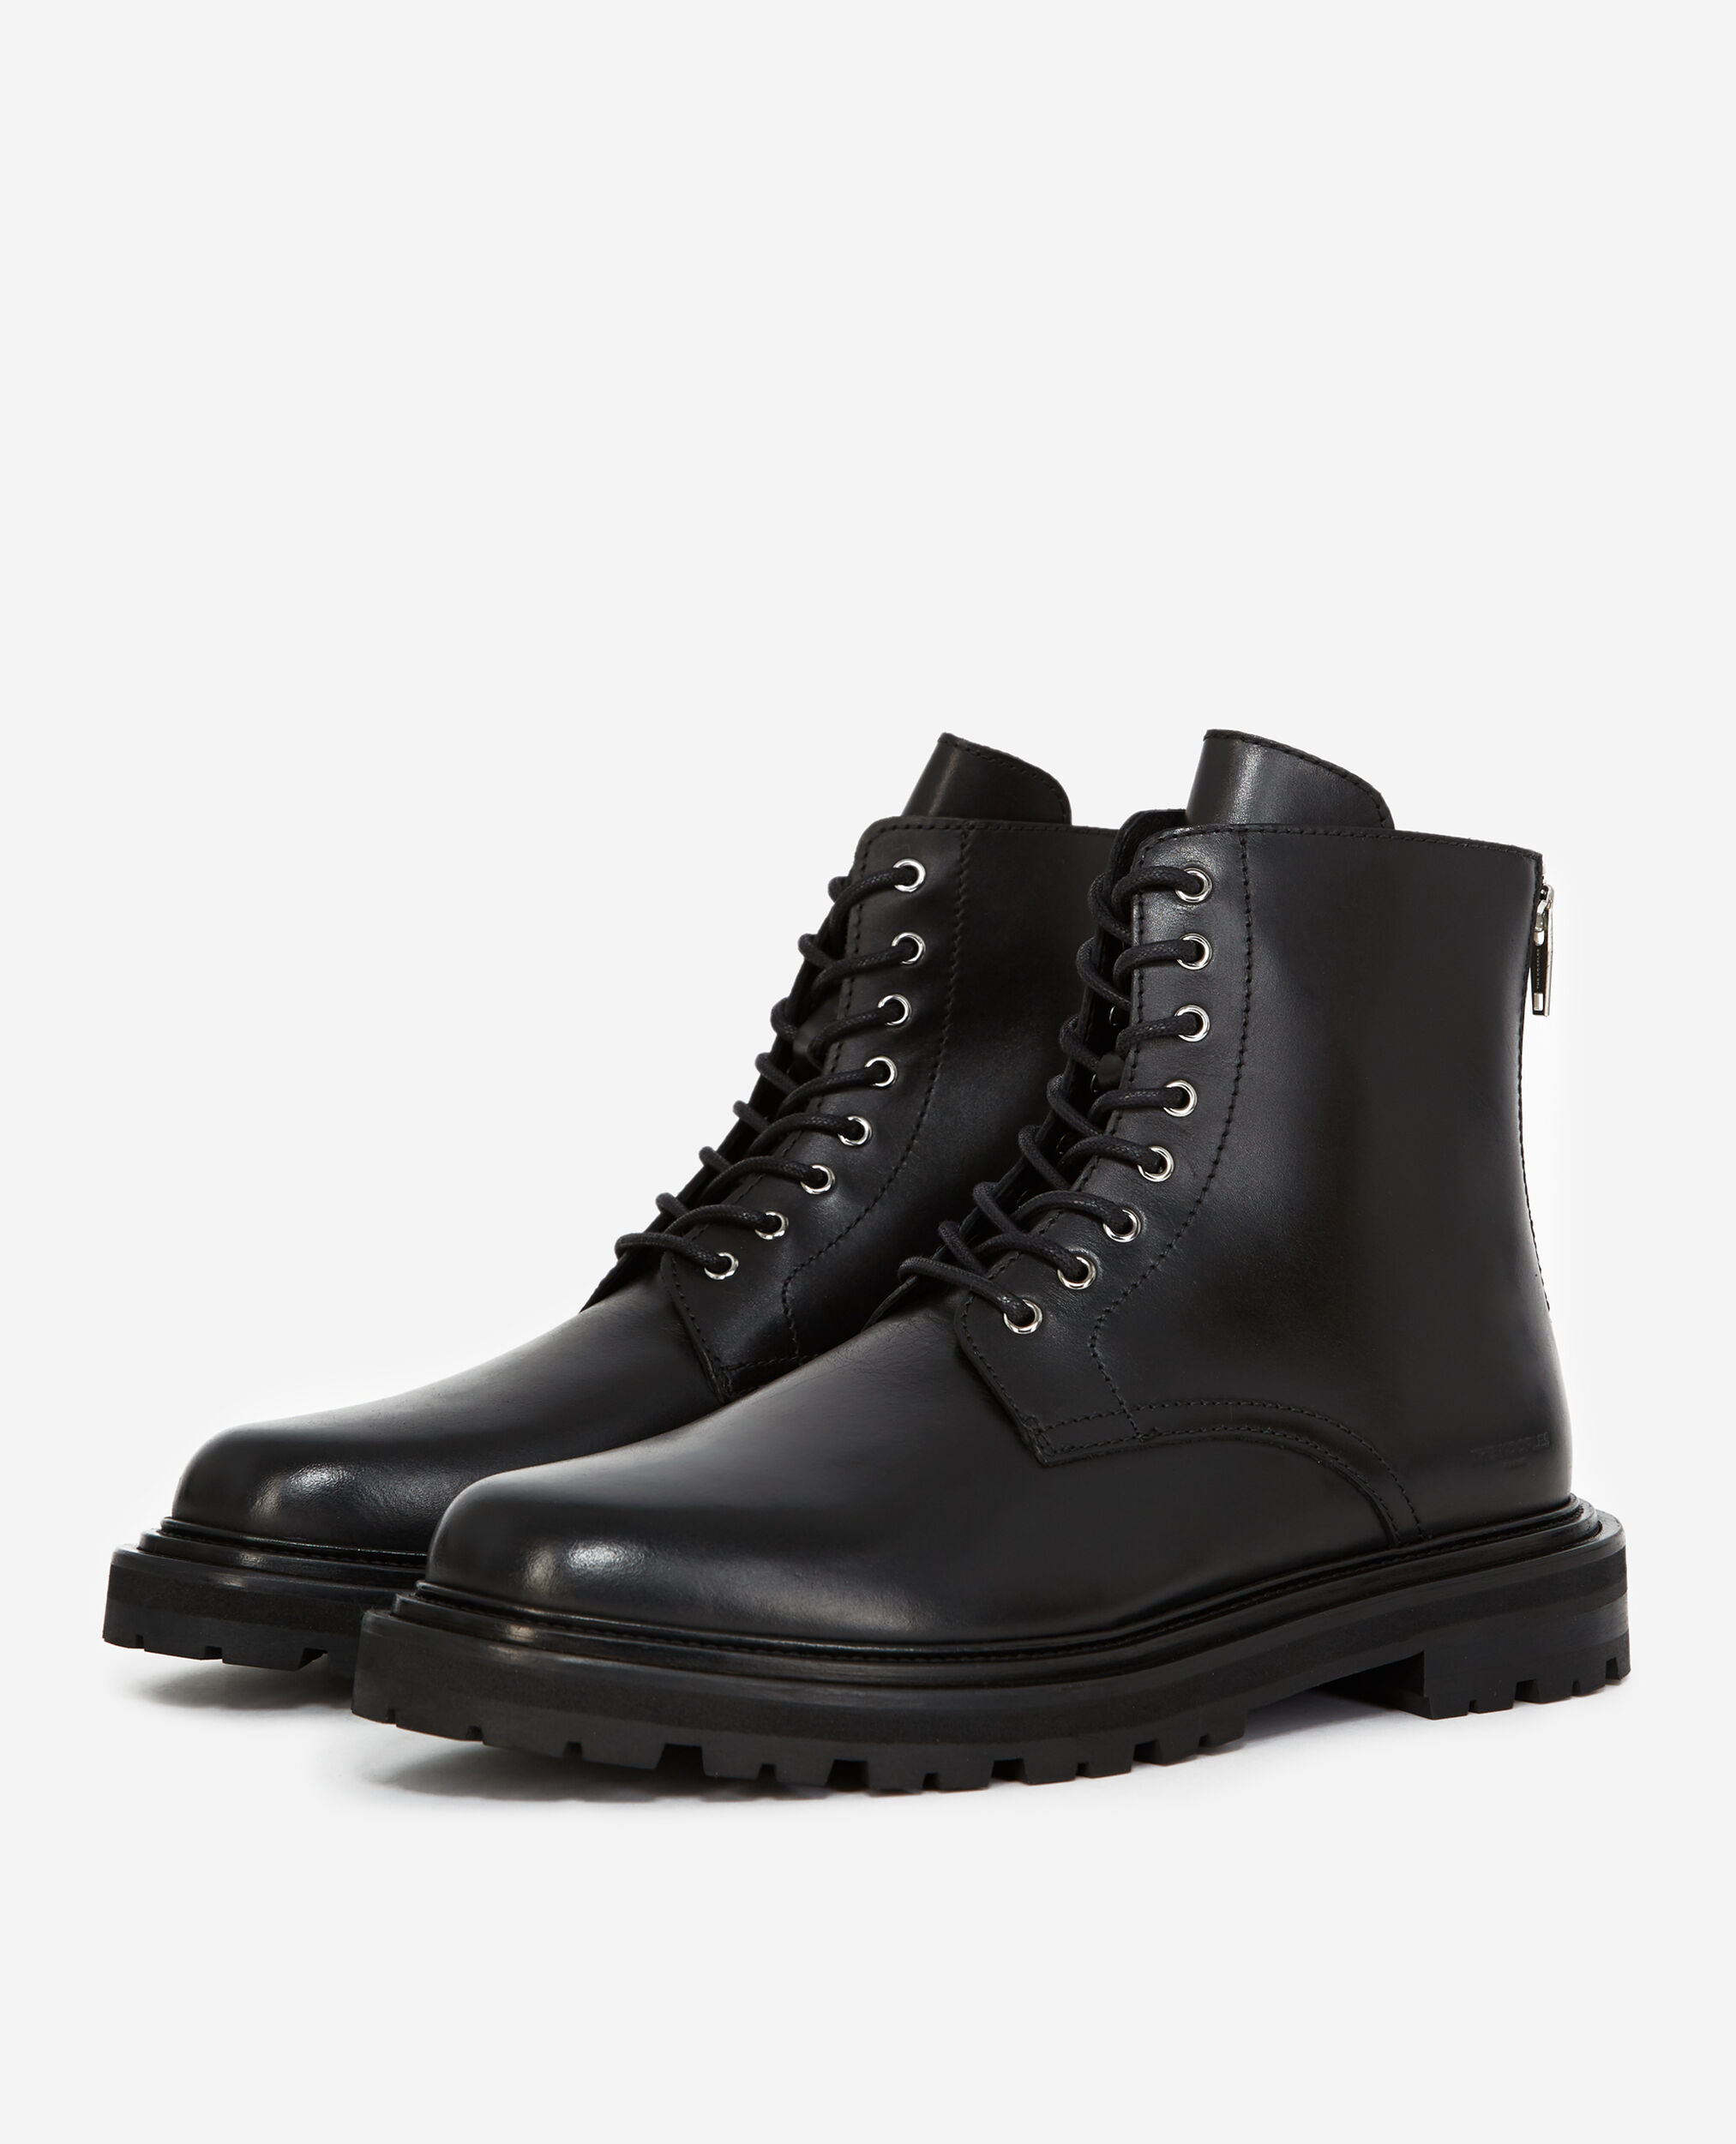 Black leather boots with thick sole, BLACK, hi-res image number null